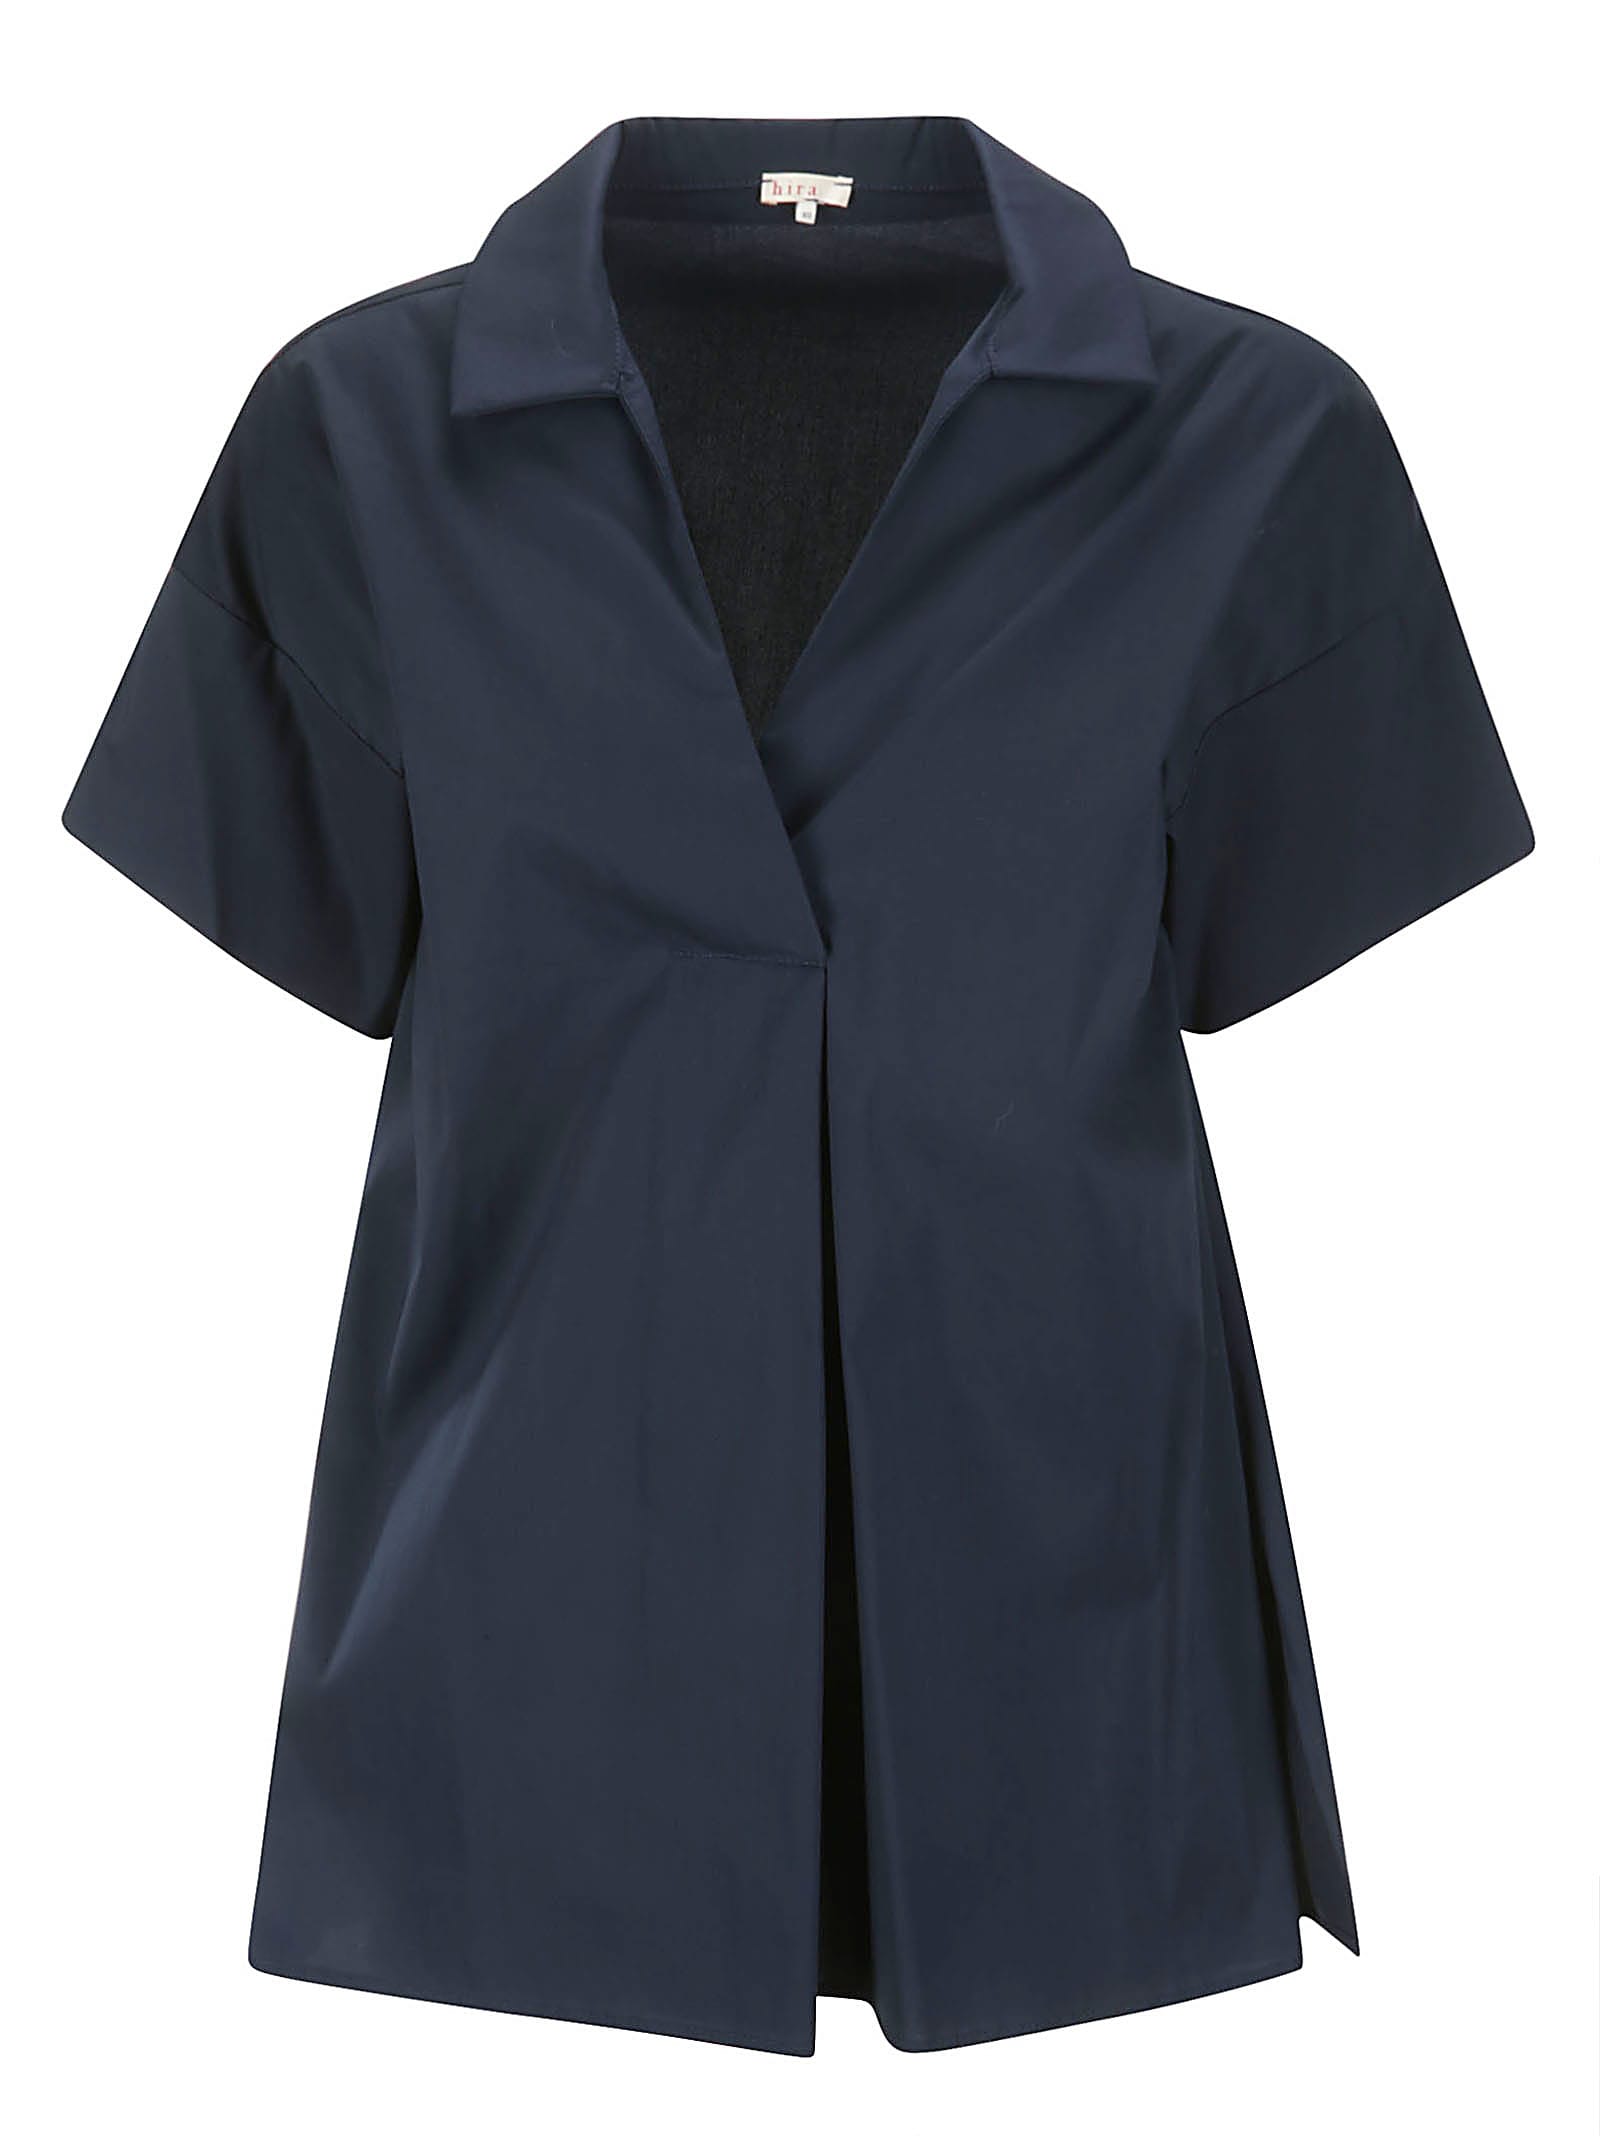 Hira Large Cotton Shirt Without Buttons In Blue